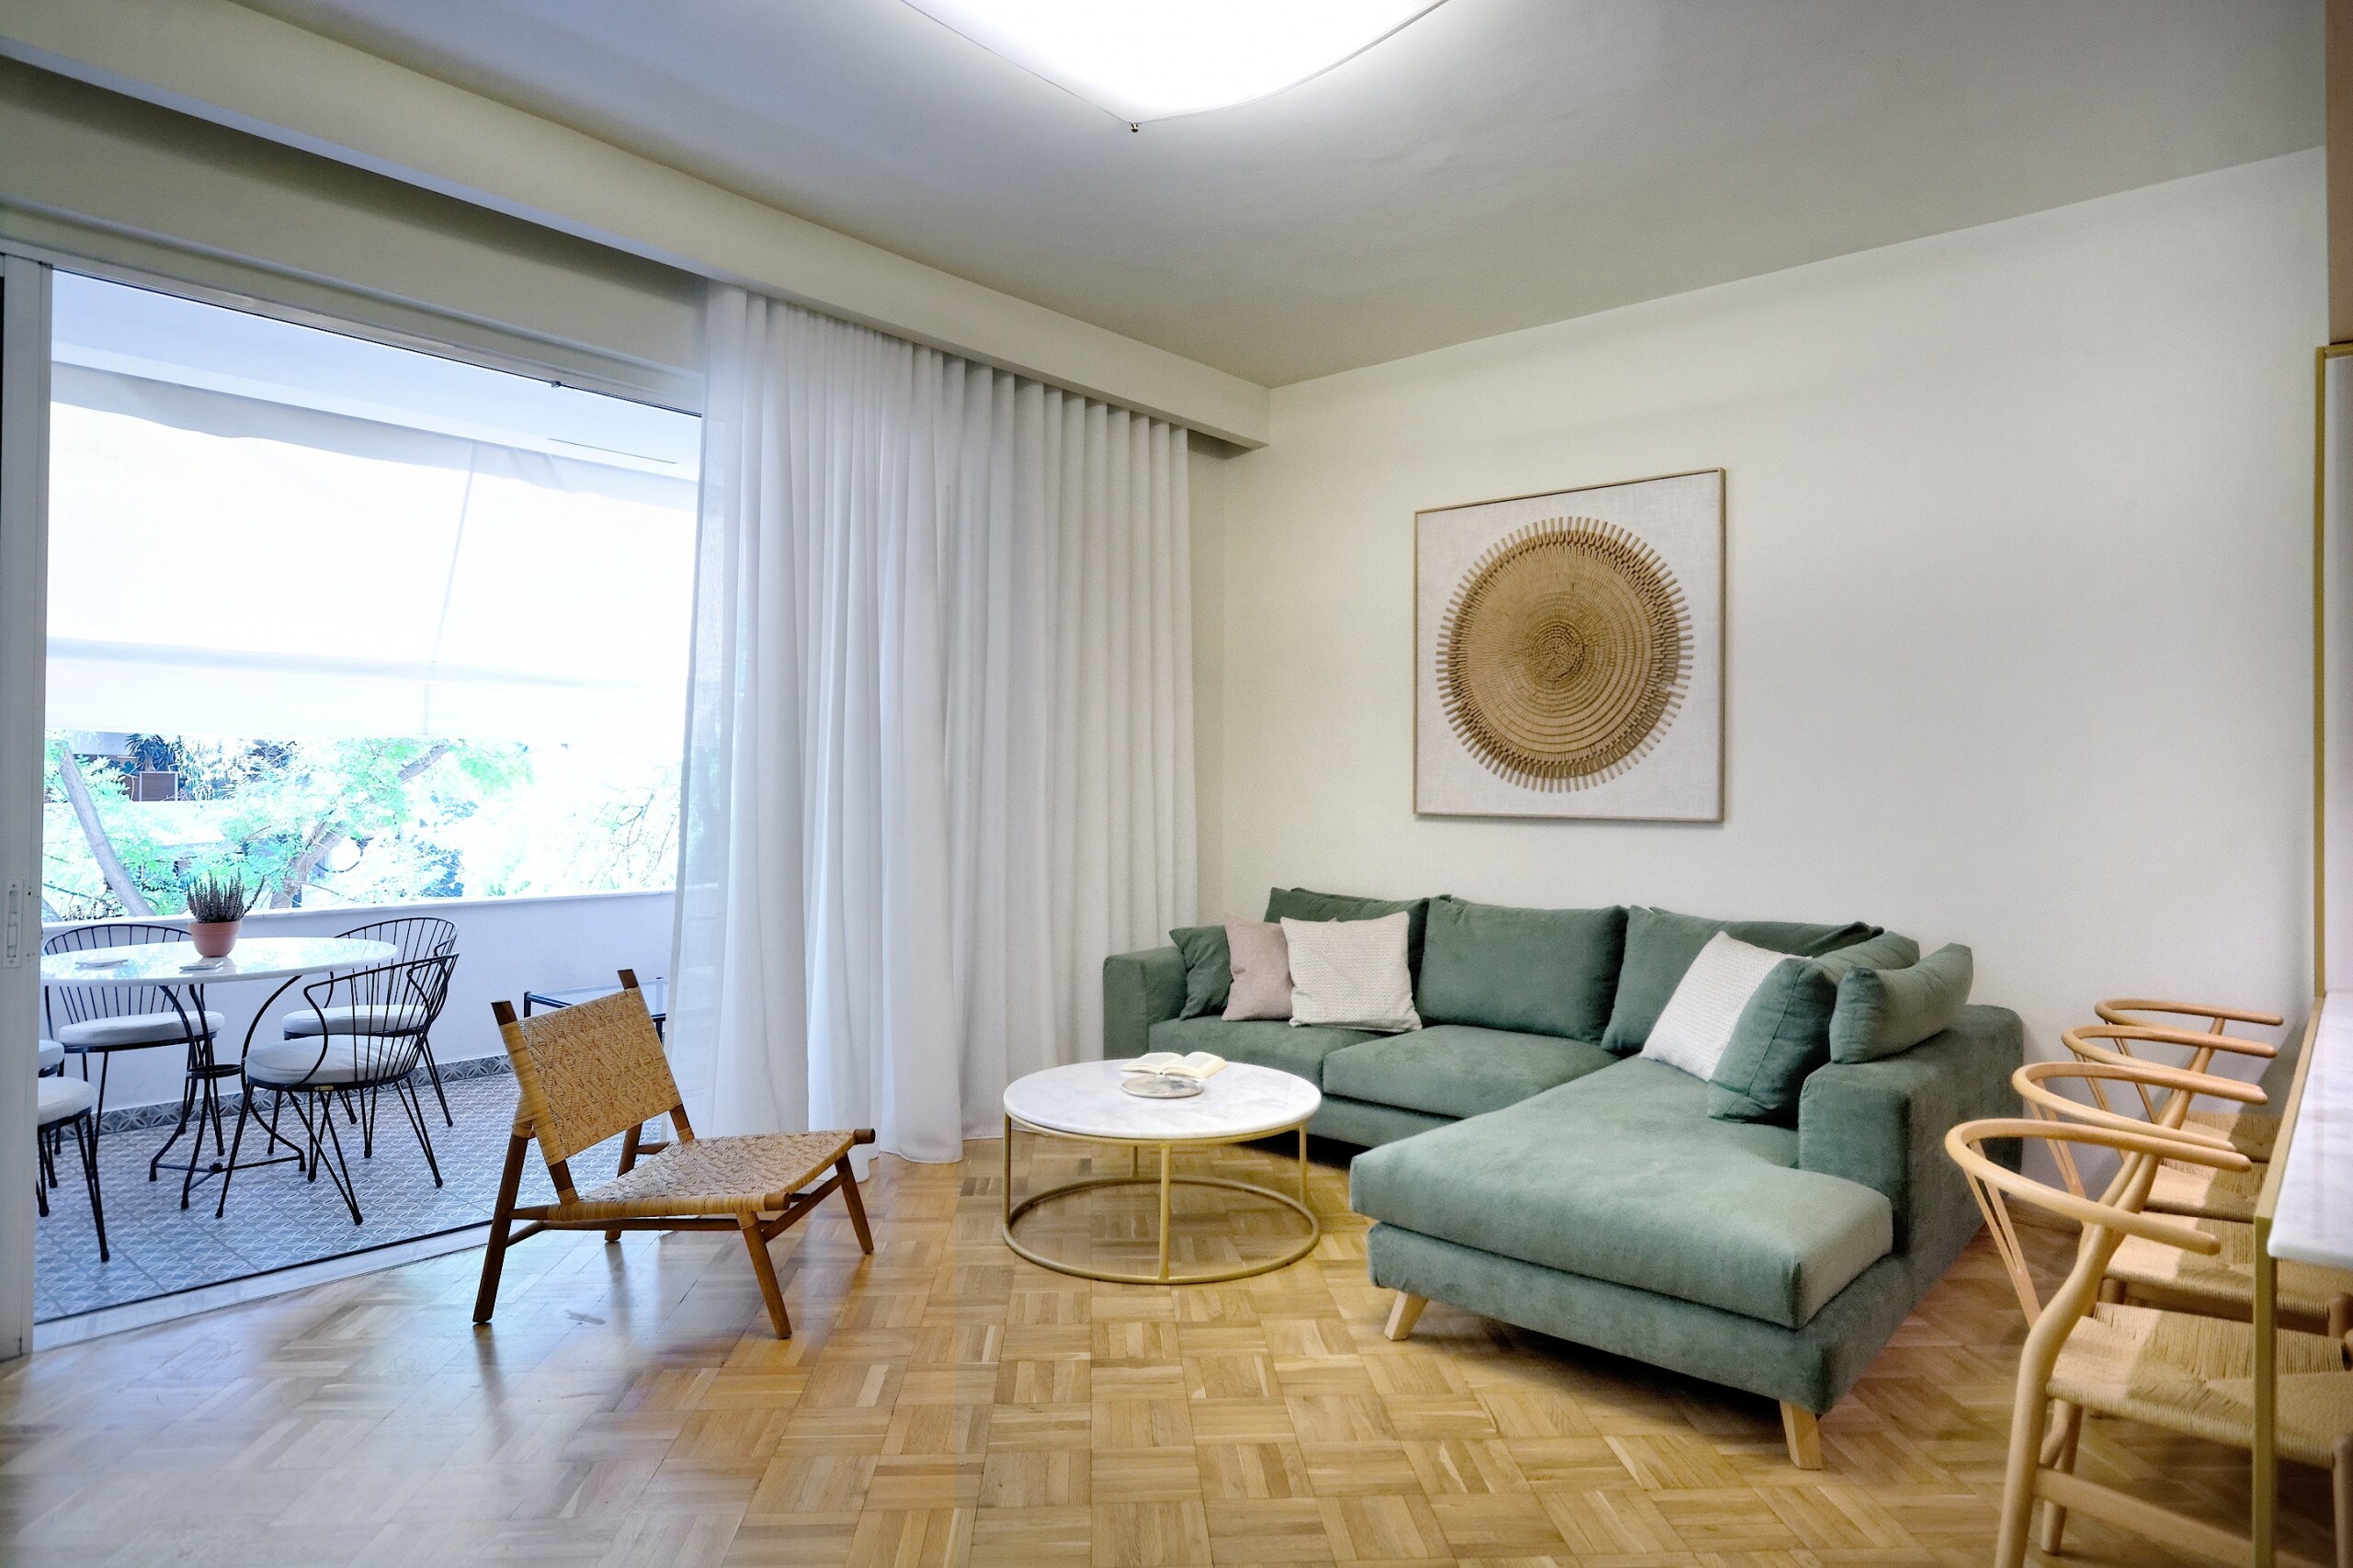 An extra luxurious apartment in one of the hippest areas of Athens! With 3 bedrooms with en-suite bathrooms with cabin shower, a big terrace with furniture overlooking the Dexameni Park and all the amenities you wish you would have, this apartment will be the gem of your visit in Athens